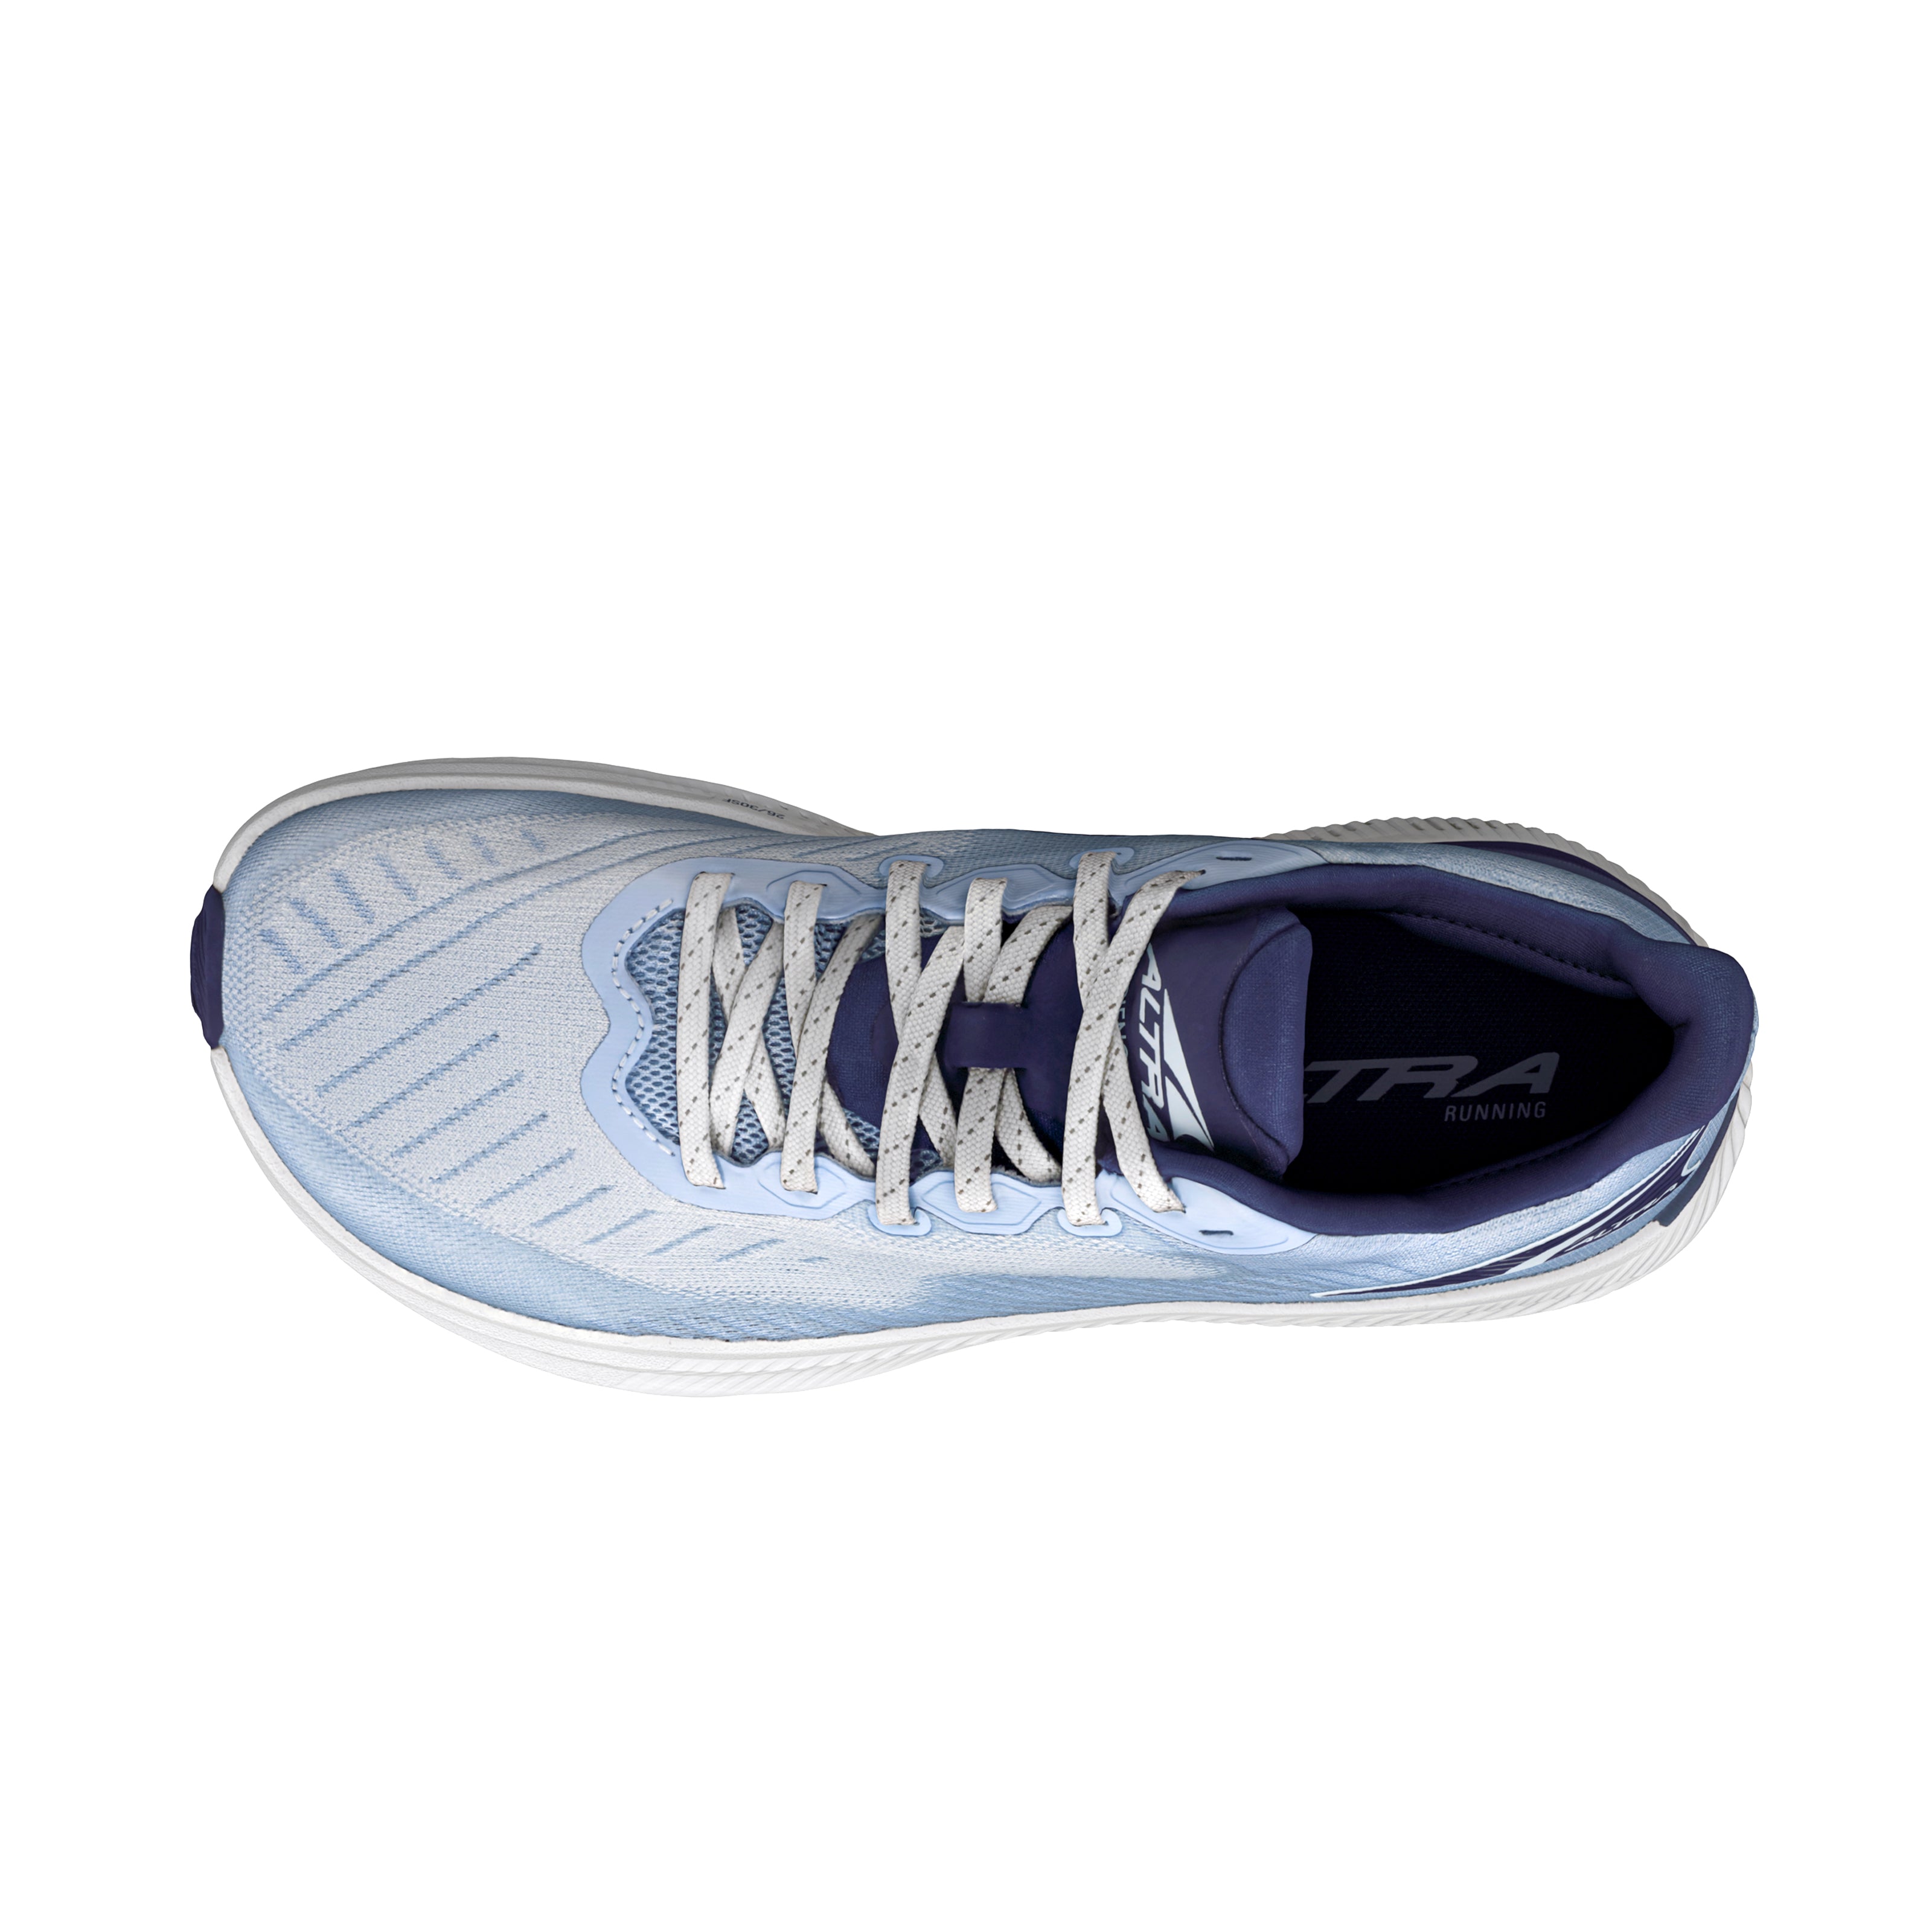 ALTRA WOMEN'S EXPERIENCE FORM - B - 420 BLUE/GRAY 